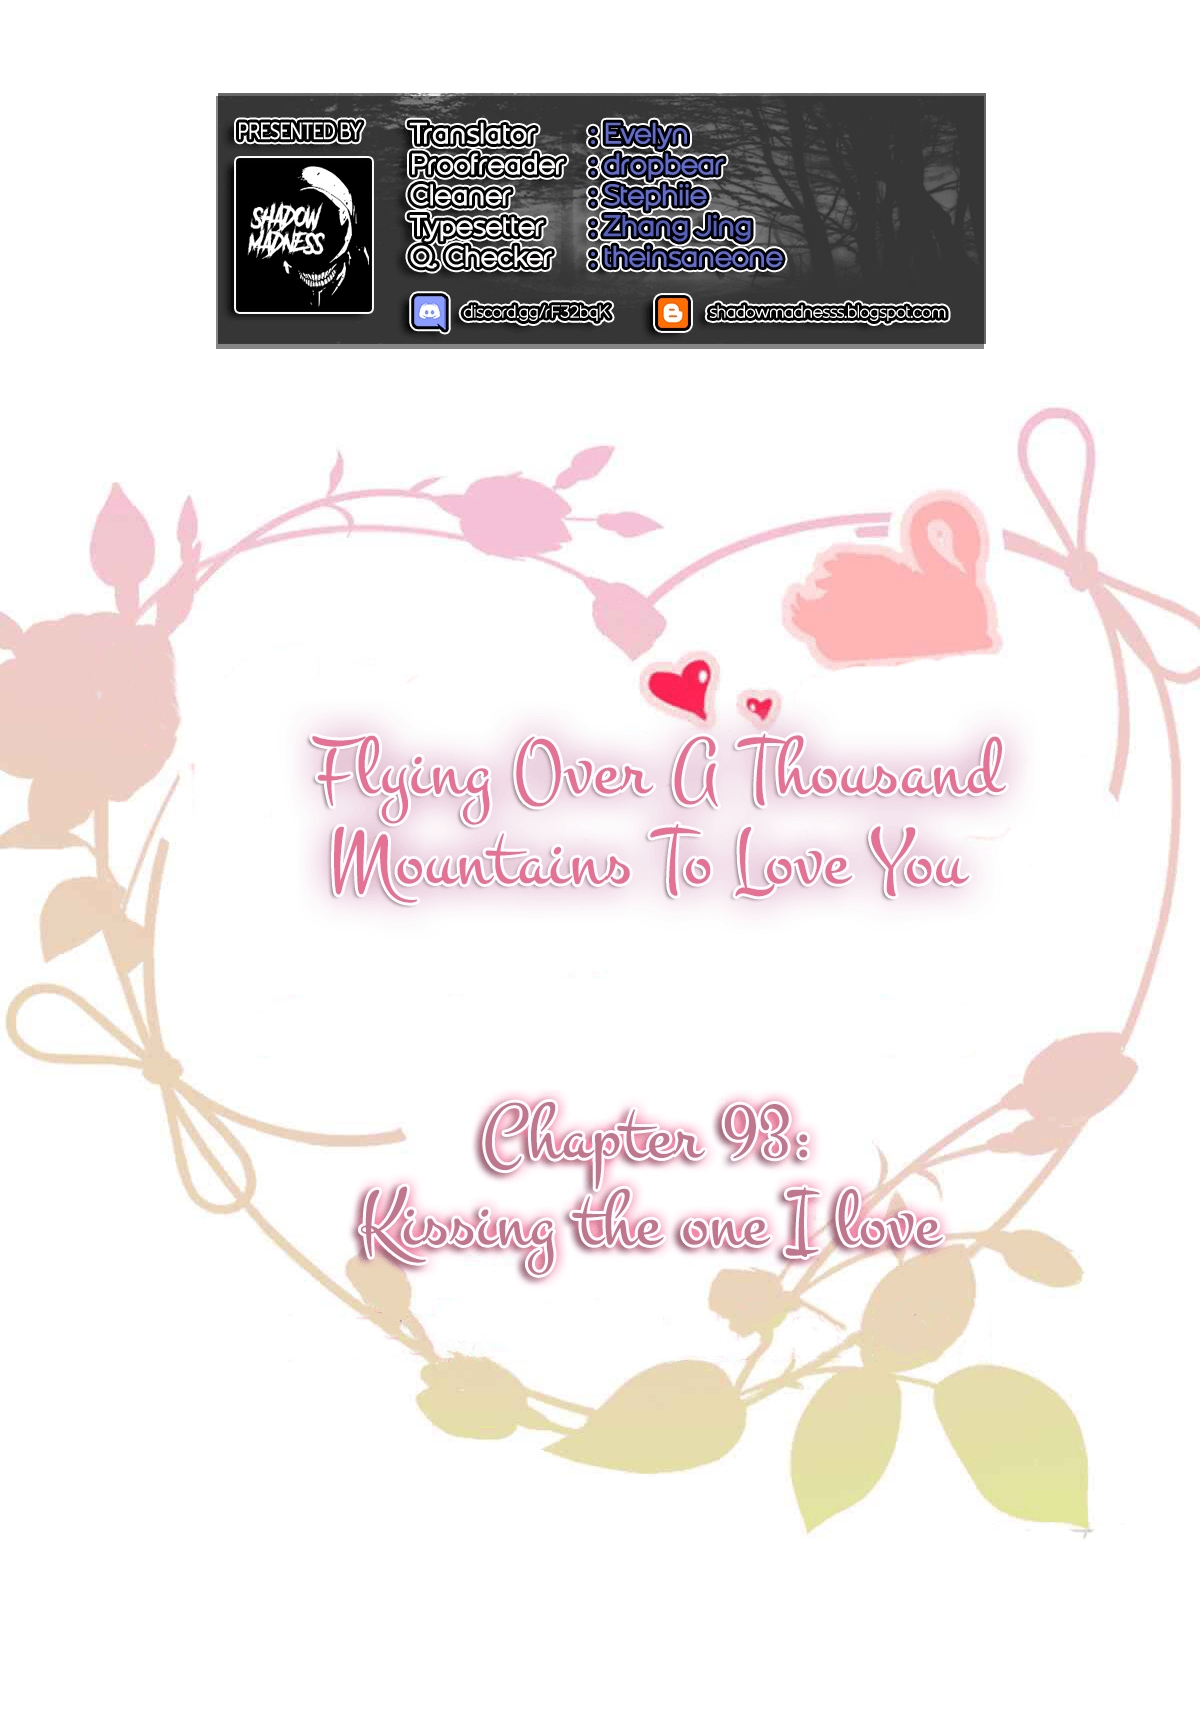 Flying Over a Thousand Mountains to Love You Ch. 93 Kissing the one I love